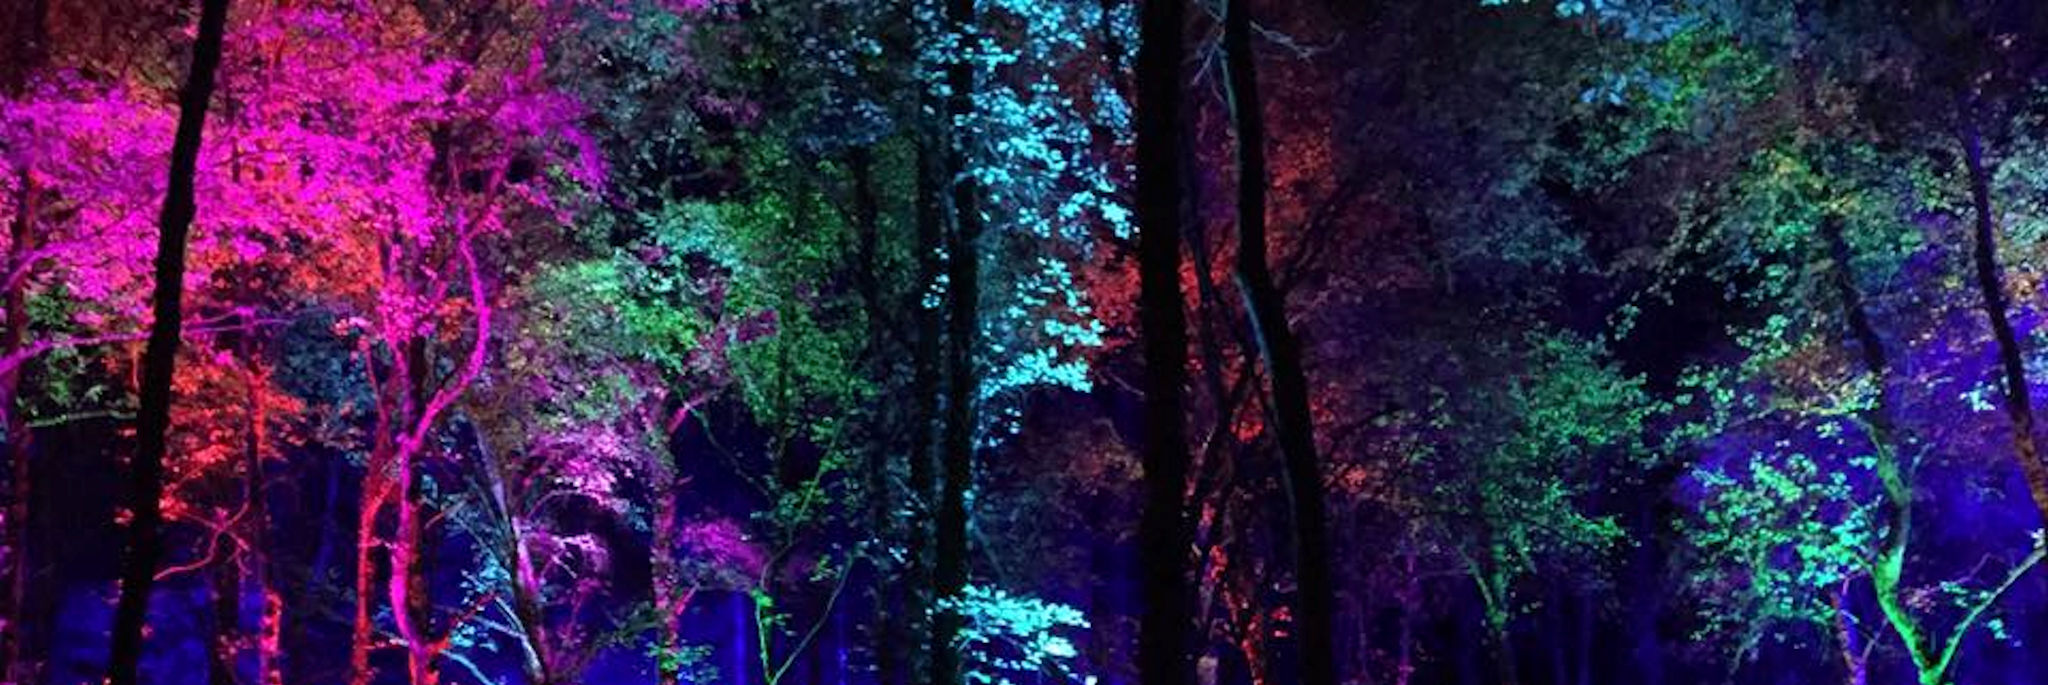 The Enchanted Forest in Pitlochry